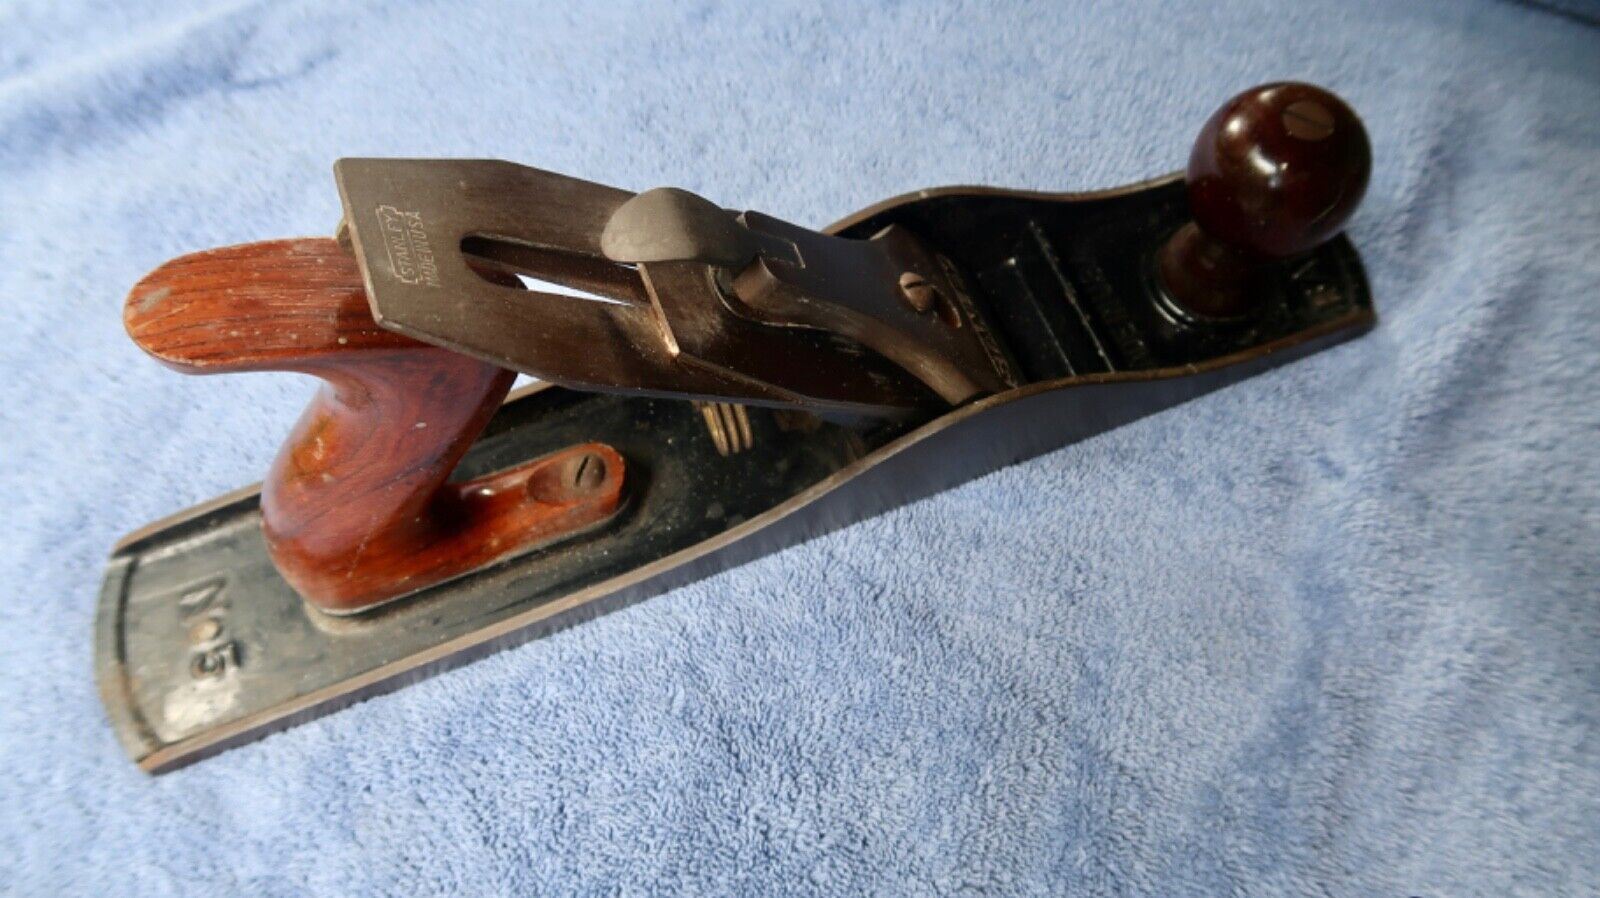 WOOD PLANE. Vintage Stanley Bailey No. 5 Wood Plane Made In USA